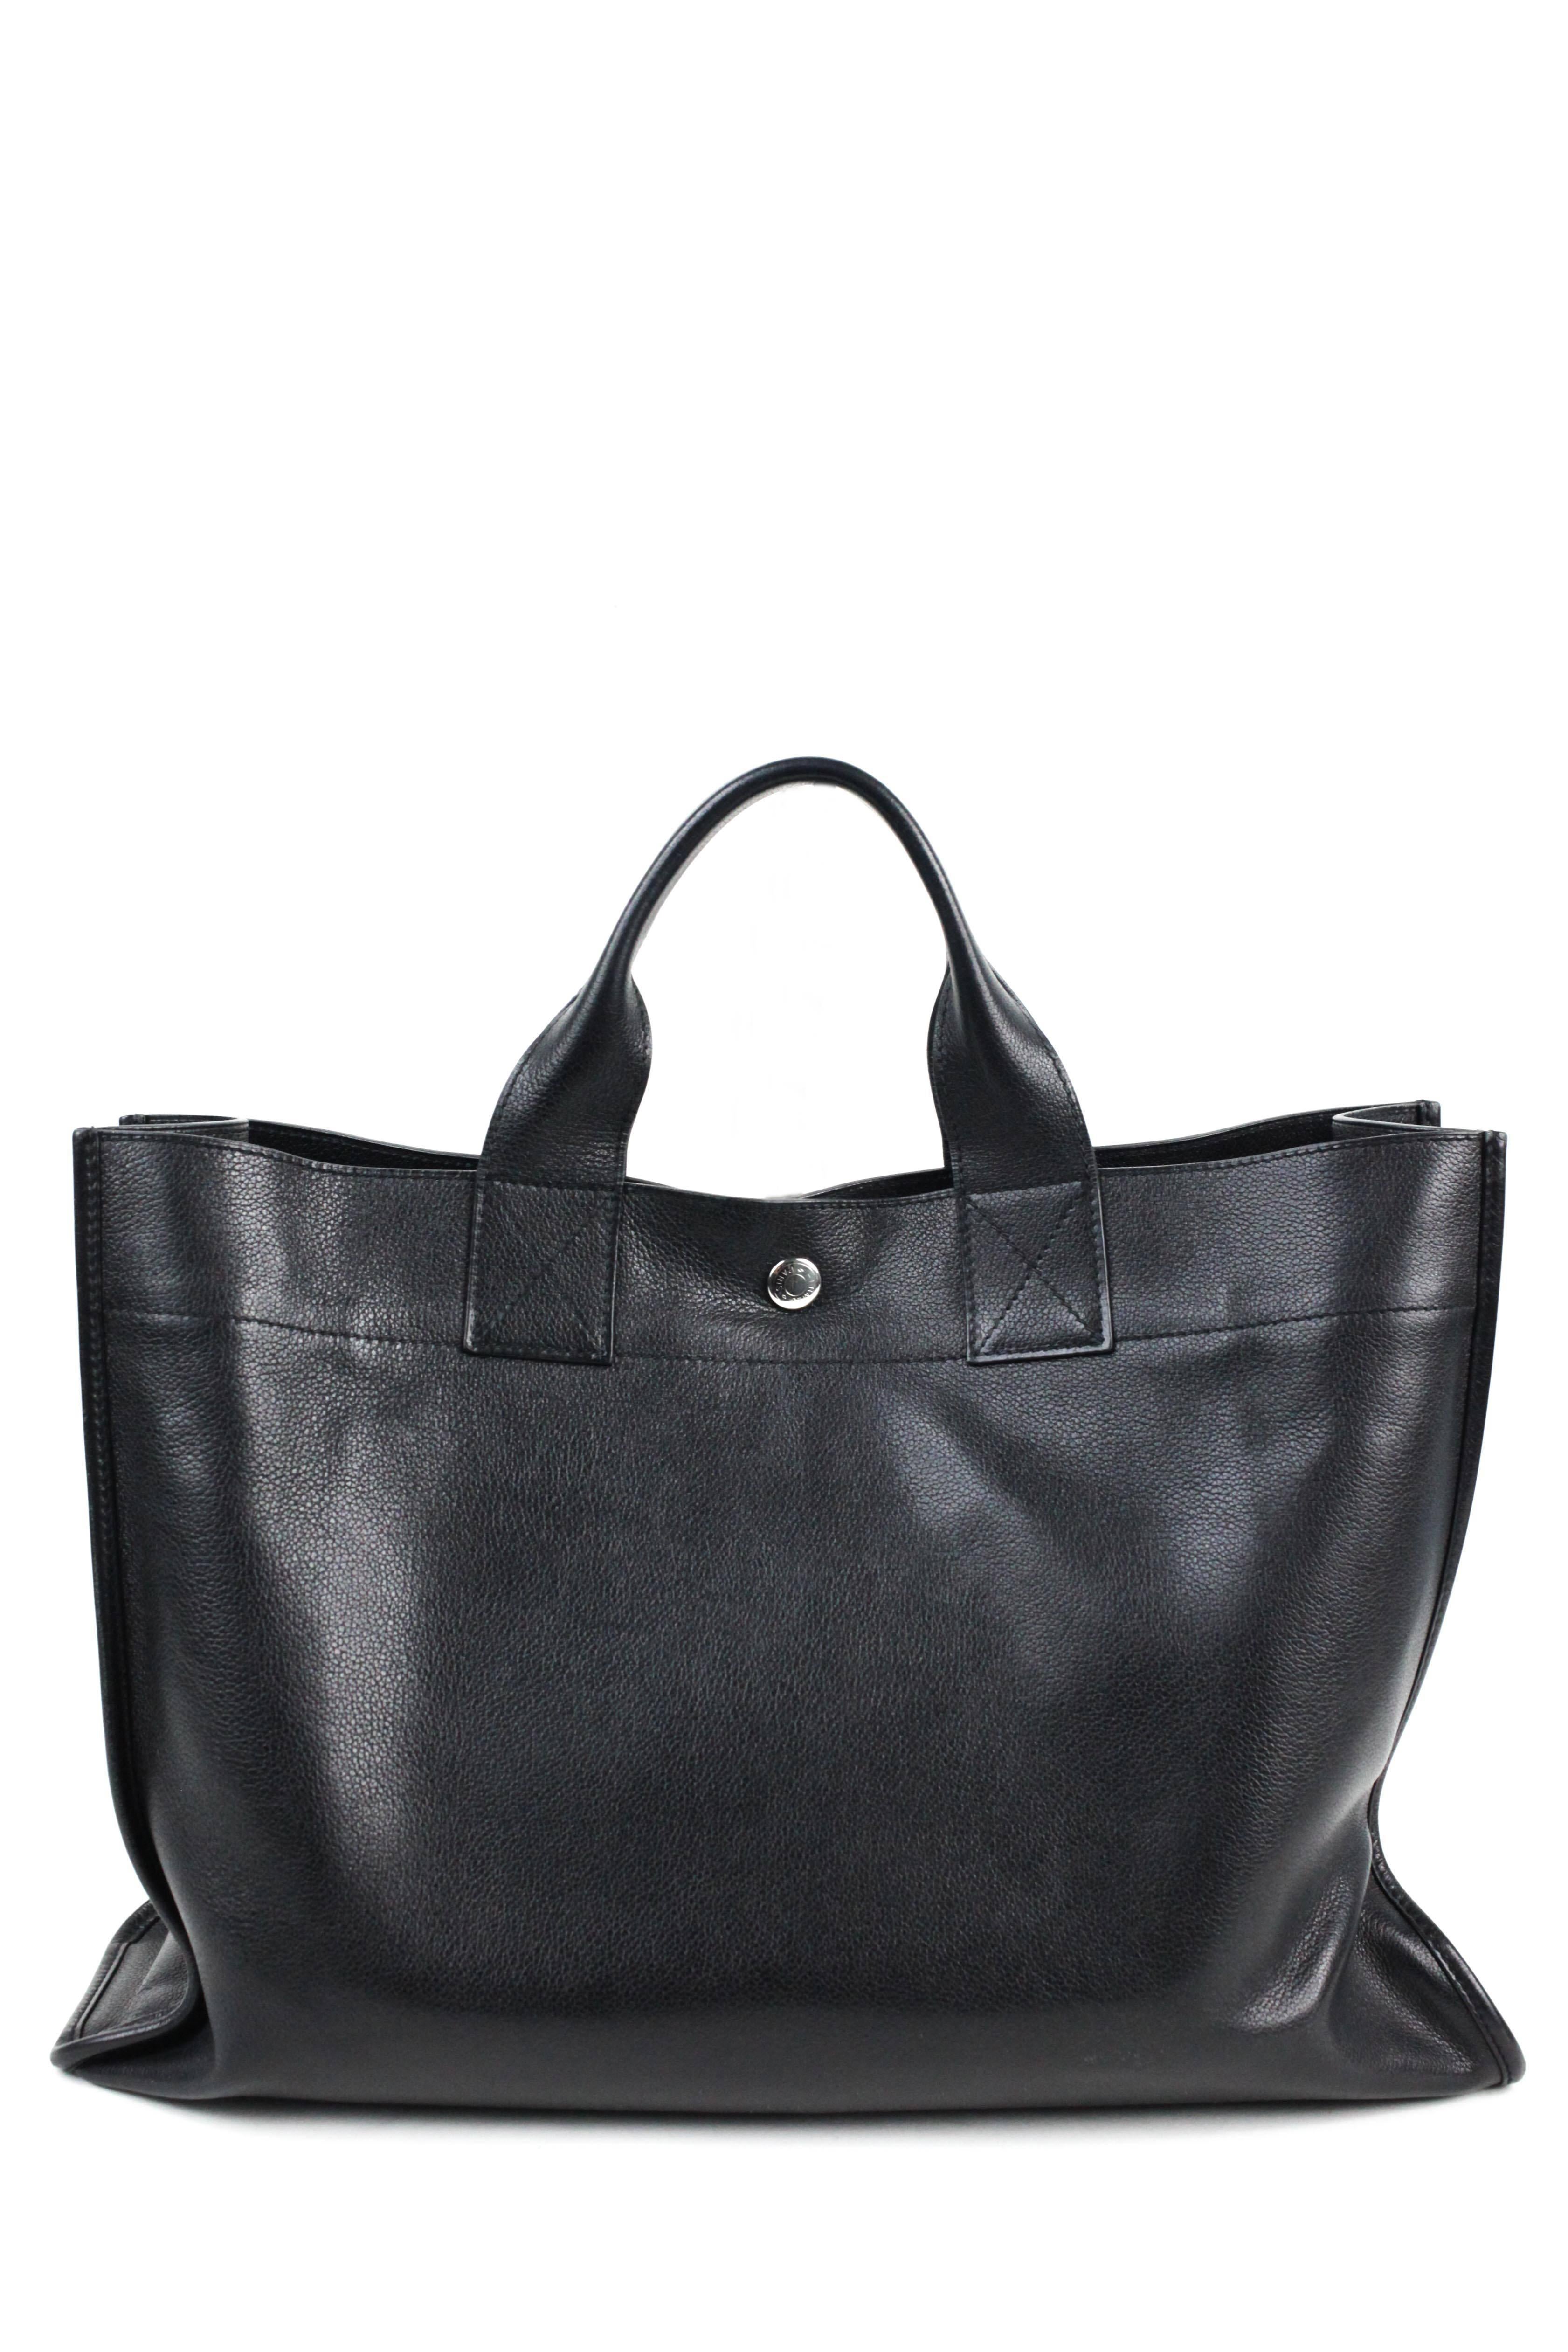 Offered is a unique style by Hermes, a GM size Clemence leather tote with a long zipper pocket in front.  Silver tone hardware against the soft pebbled grain offers a versatile piece for your collection.  

DIMENSIONS:

Height:  10.5
Width:   